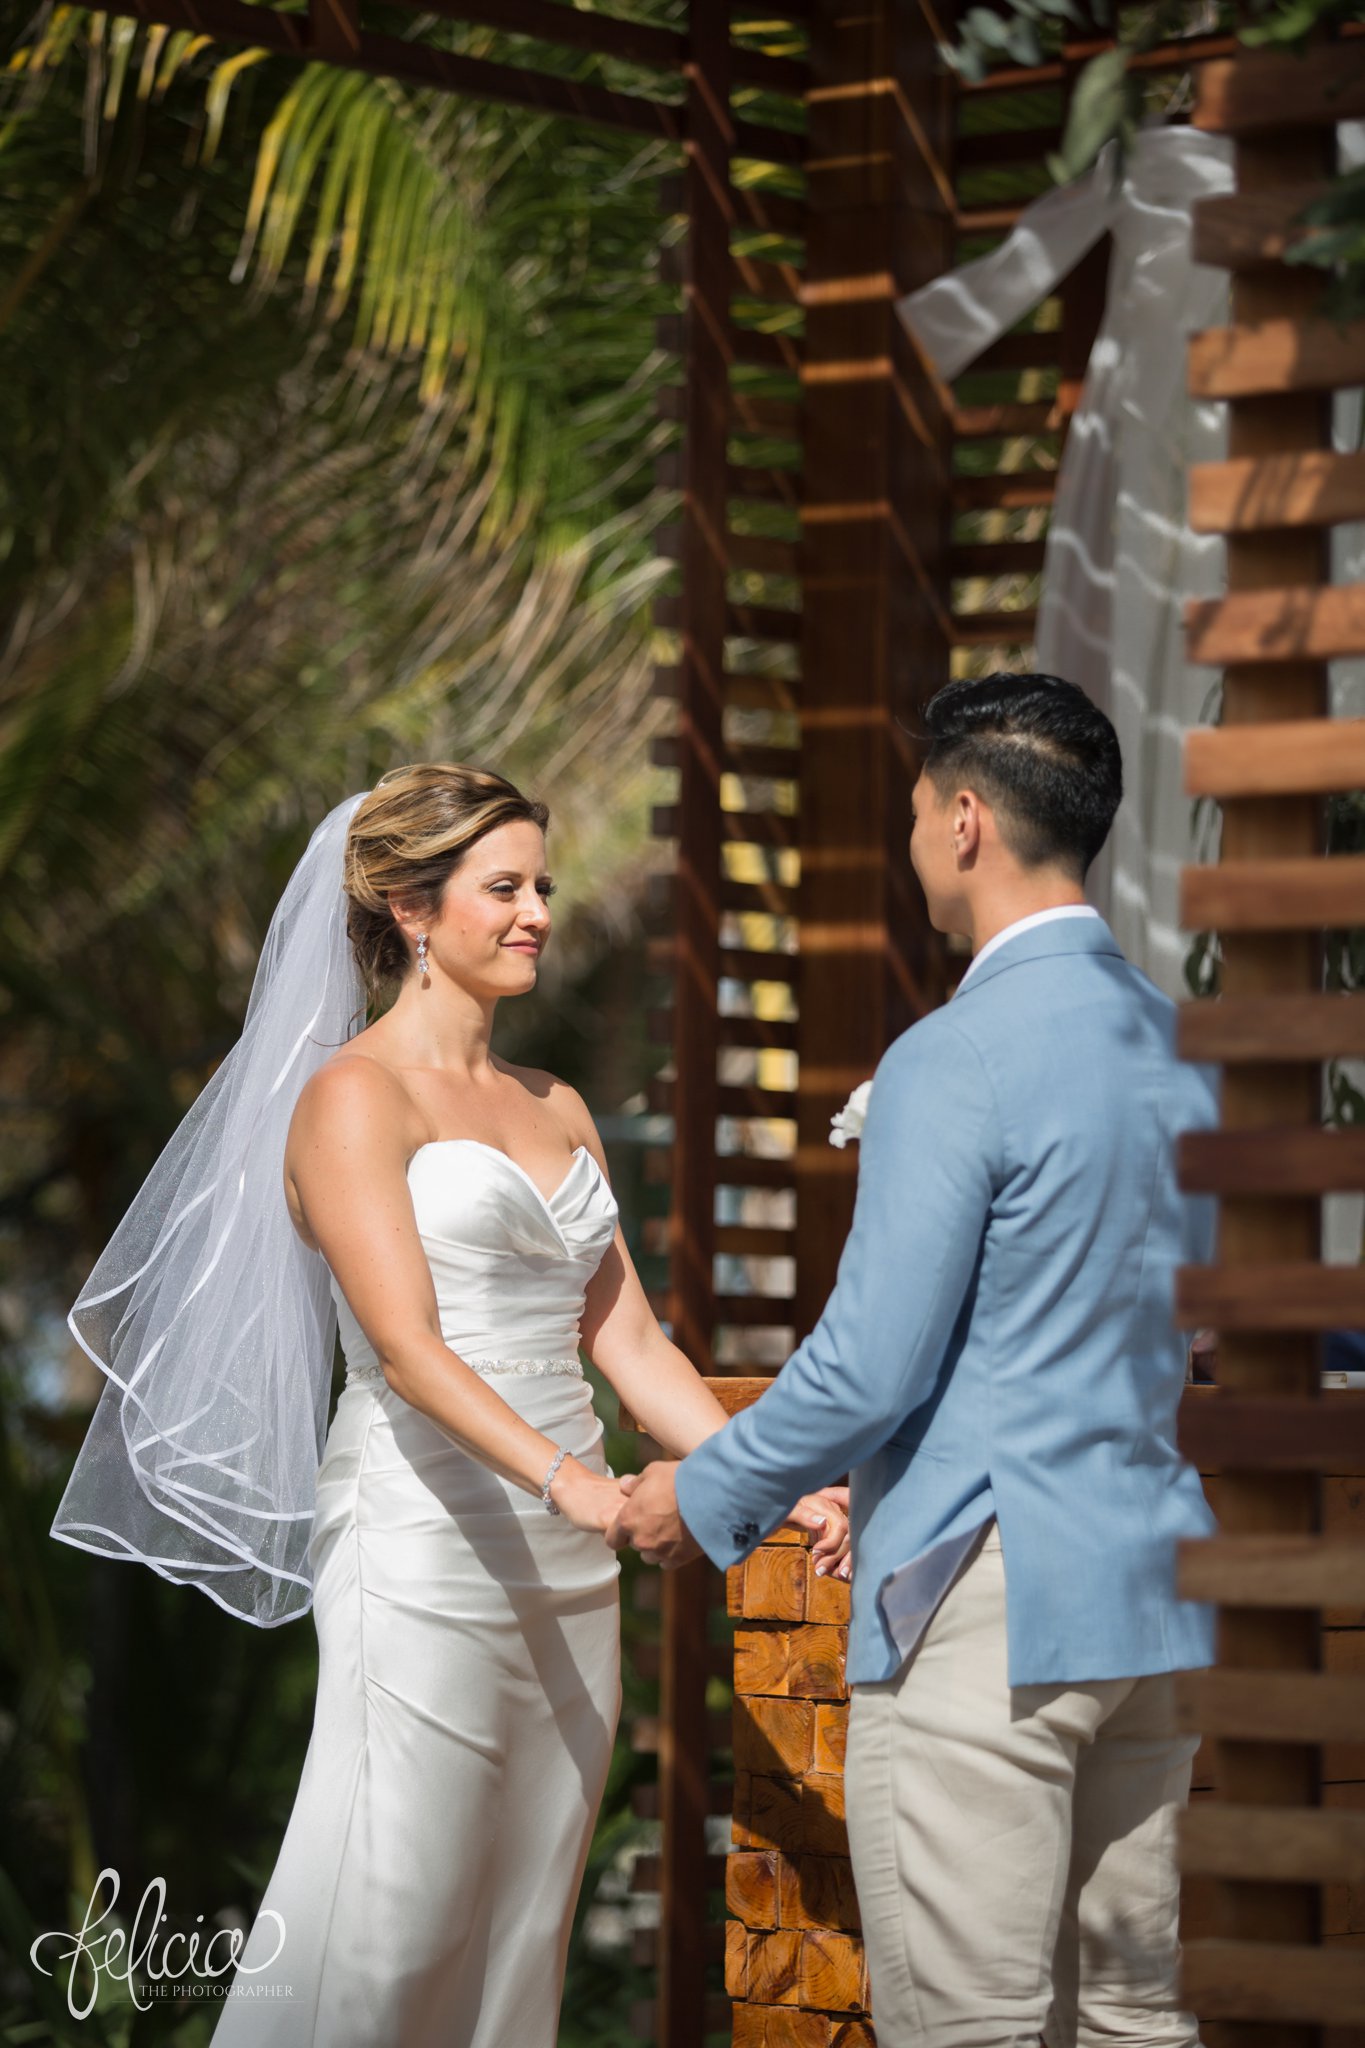 images by feliciathephotographer.com | Destination Beach Wedding | Unicco 20 87 | Photographer | L&S Travel | ceremony | strapless dress | chic | blue jacket | veil | palm trees | stone altar | wooden background | holding hands | exchanging vows 